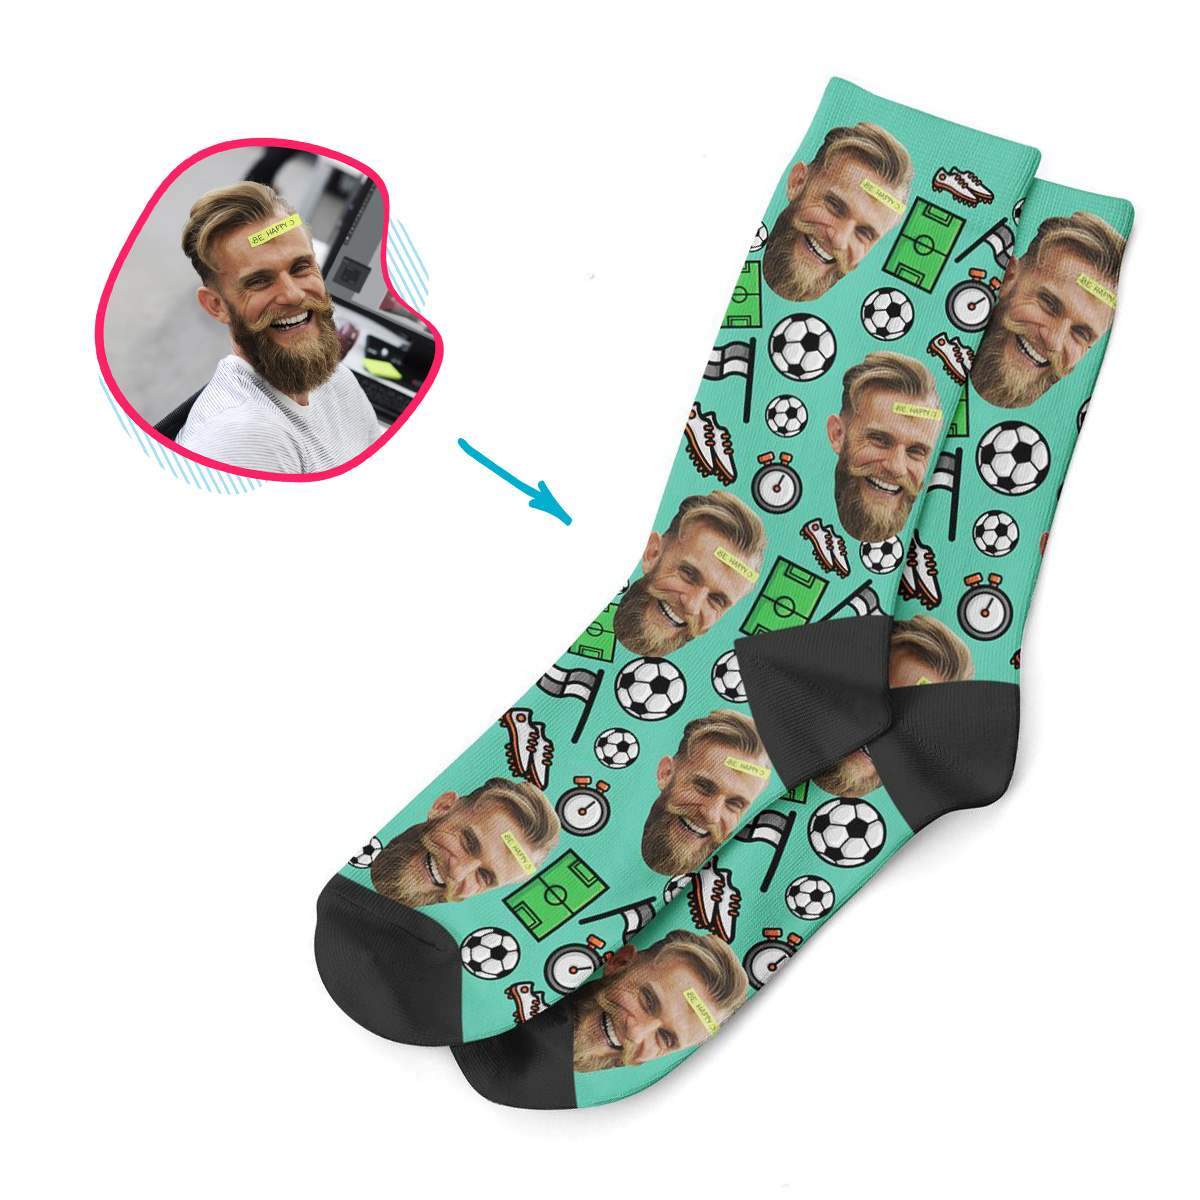 mint Football socks personalized with photo of face printed on them